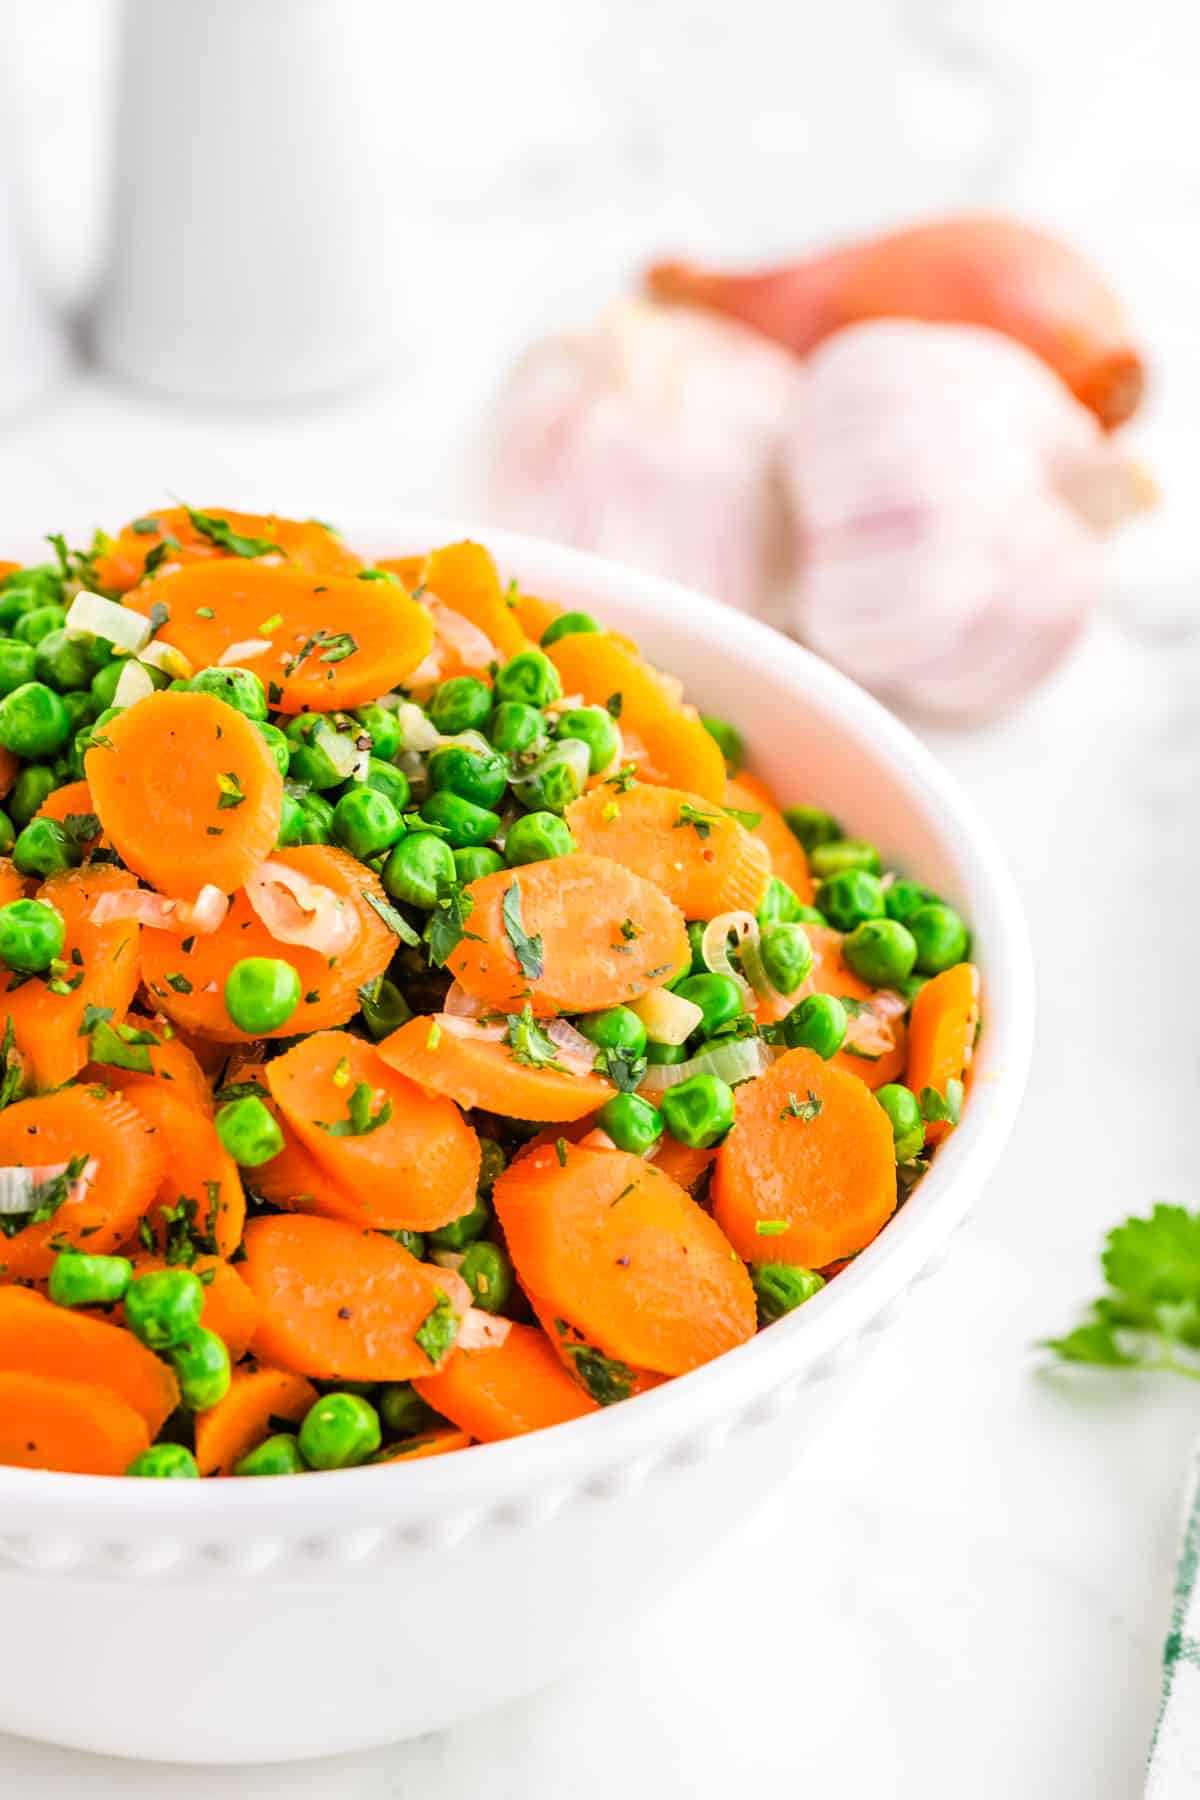 The finished Peas and Carrots in a serving bowl.